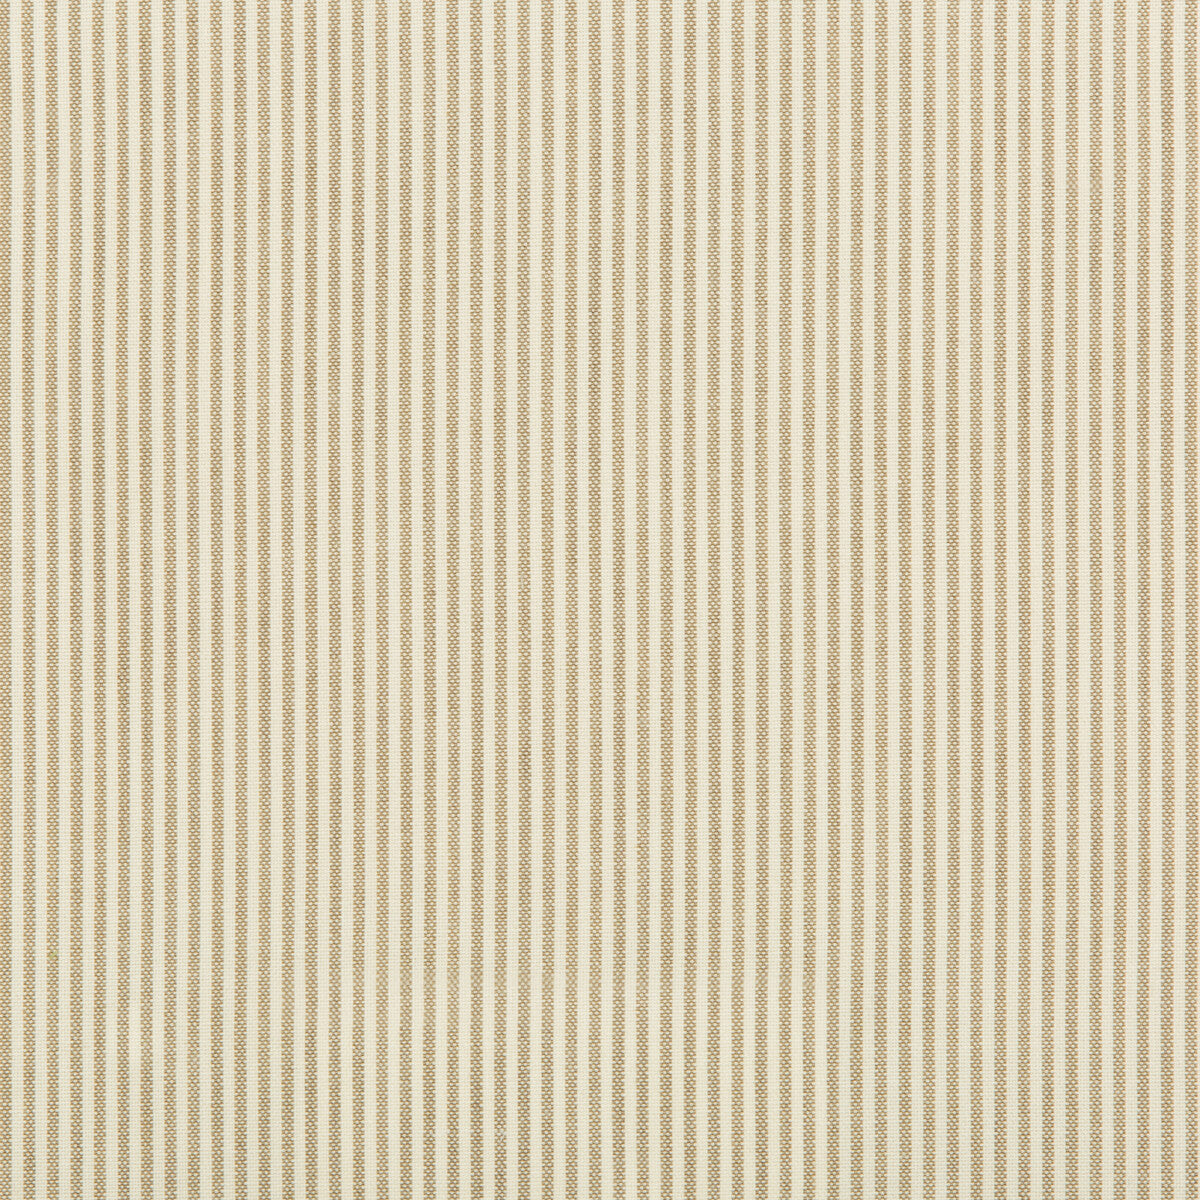 Kravet Basics fabric in 35374-106 color - pattern 35374.106.0 - by Kravet Basics in the Performance Indoor Outdoor collection